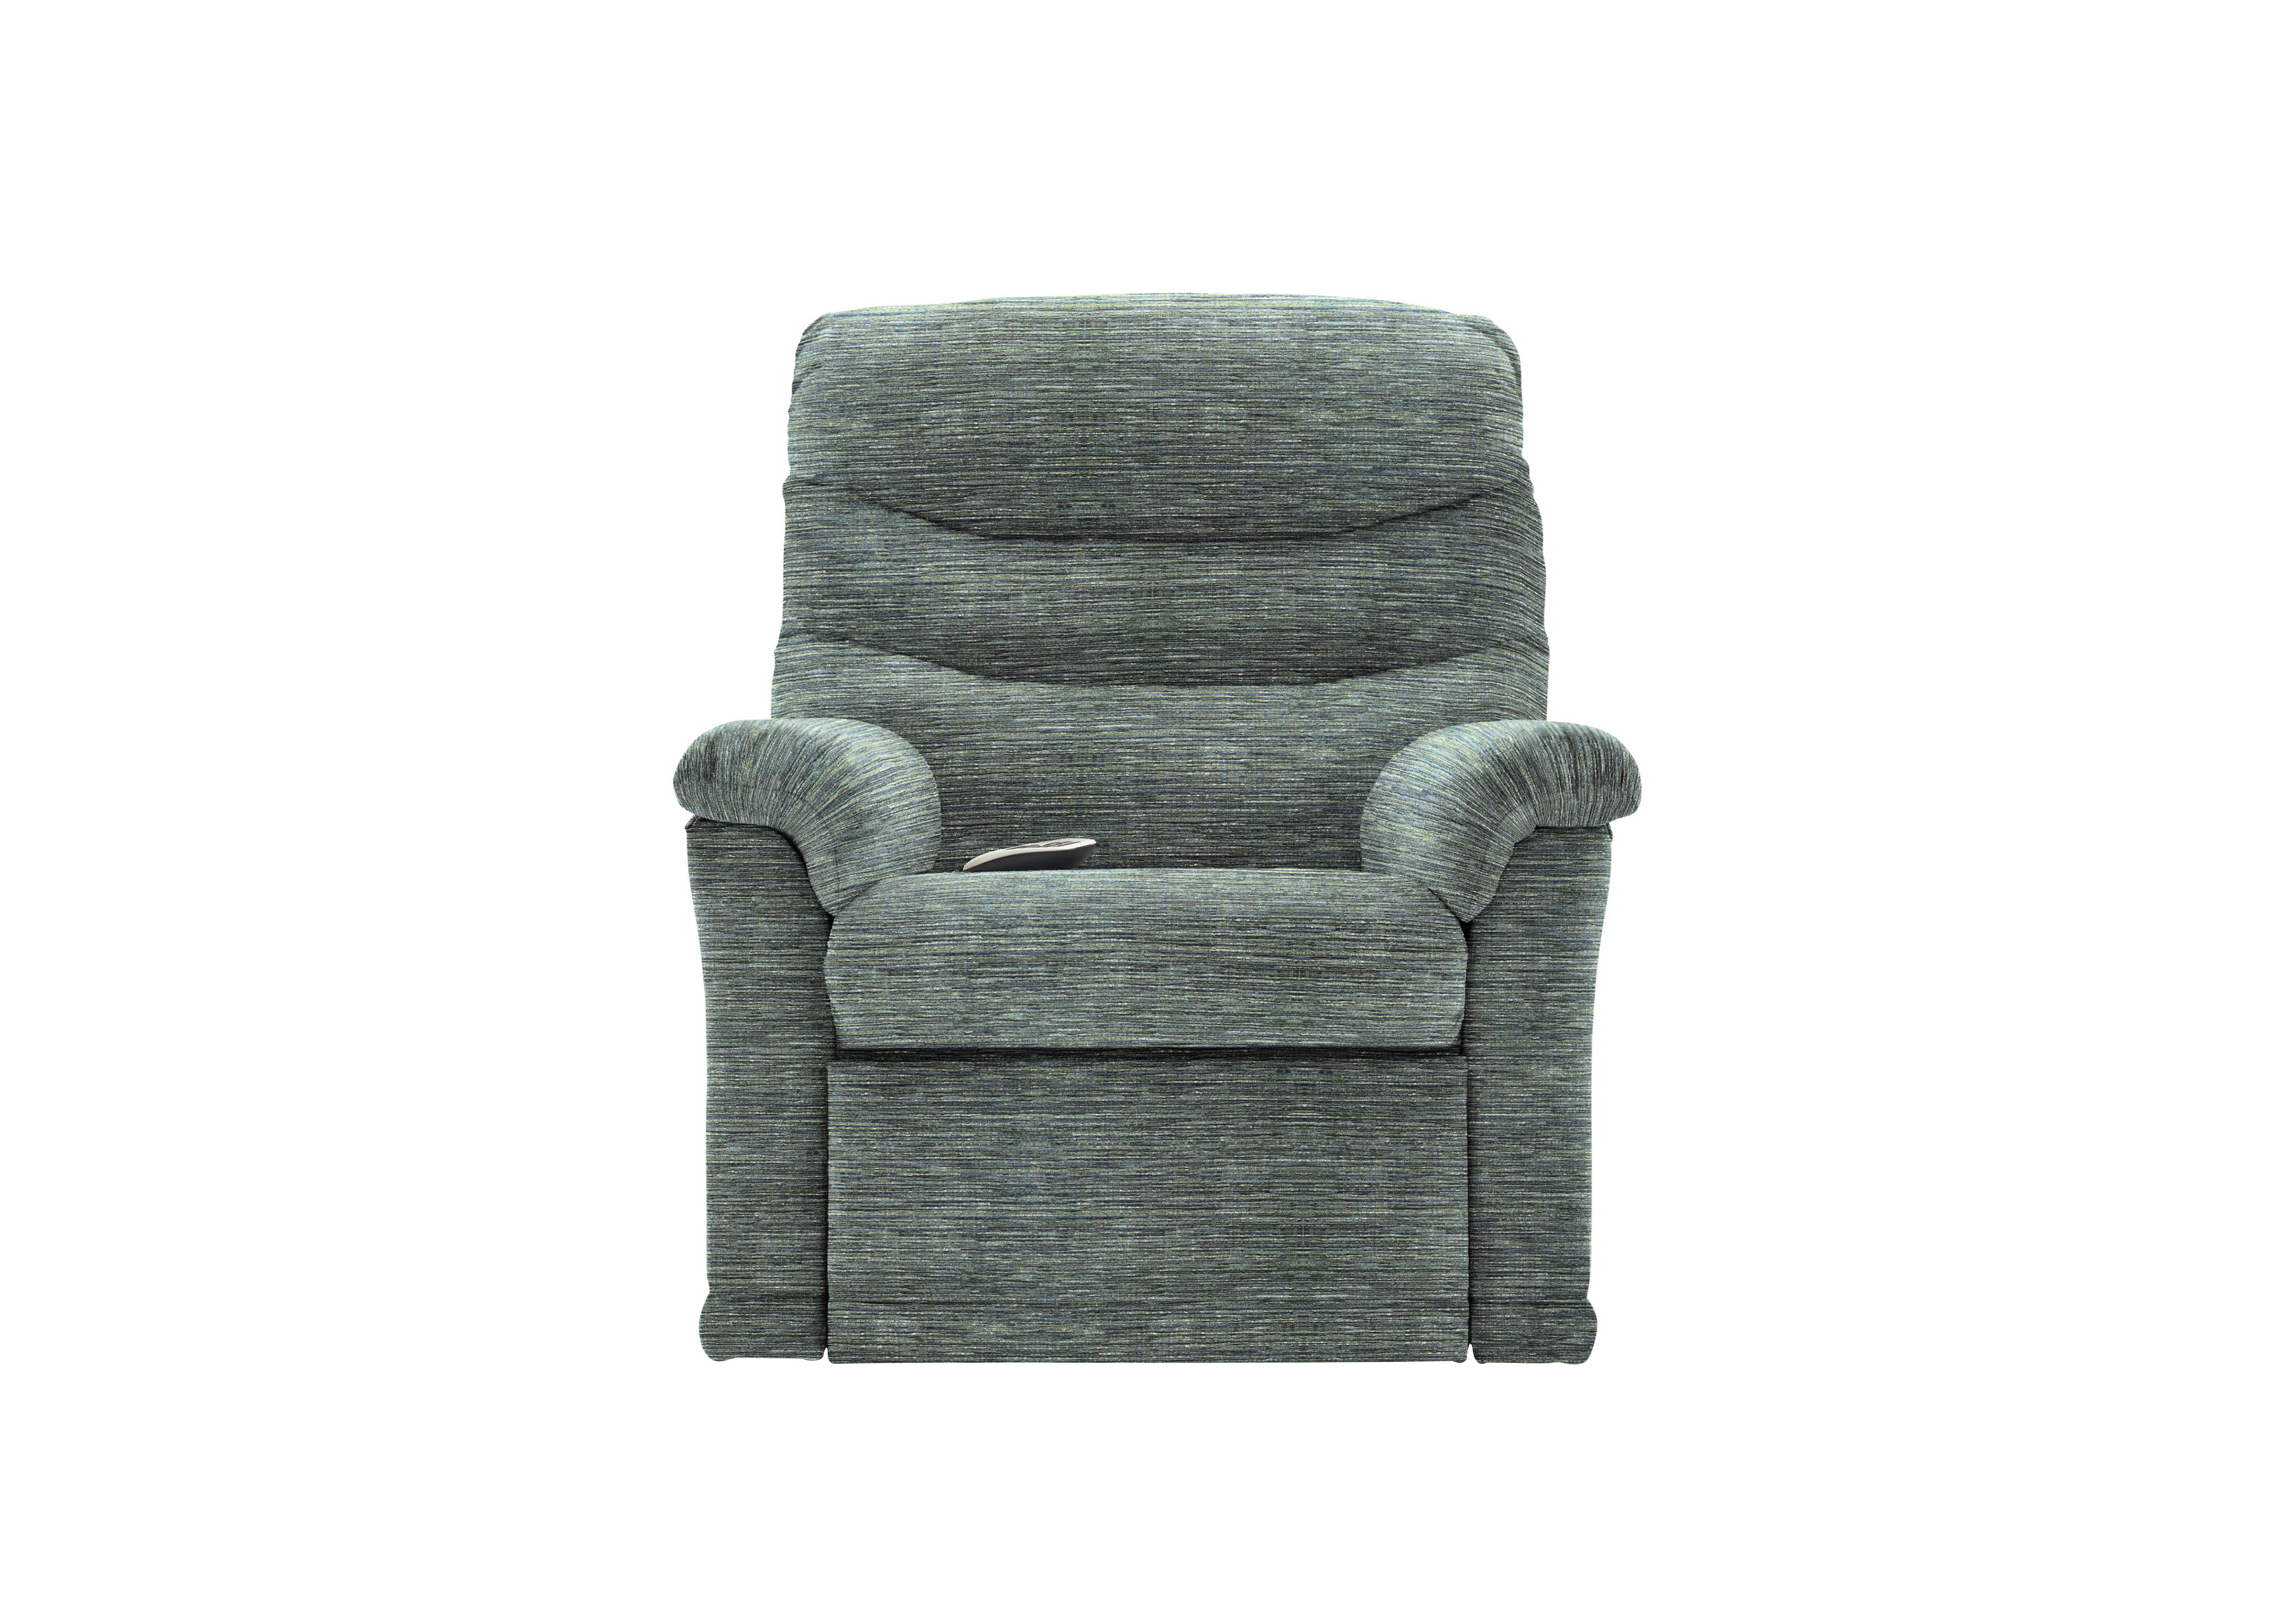 Malvern Fabric Small Rise and Recline Armchair in B925 Waffle Marine on Furniture Village